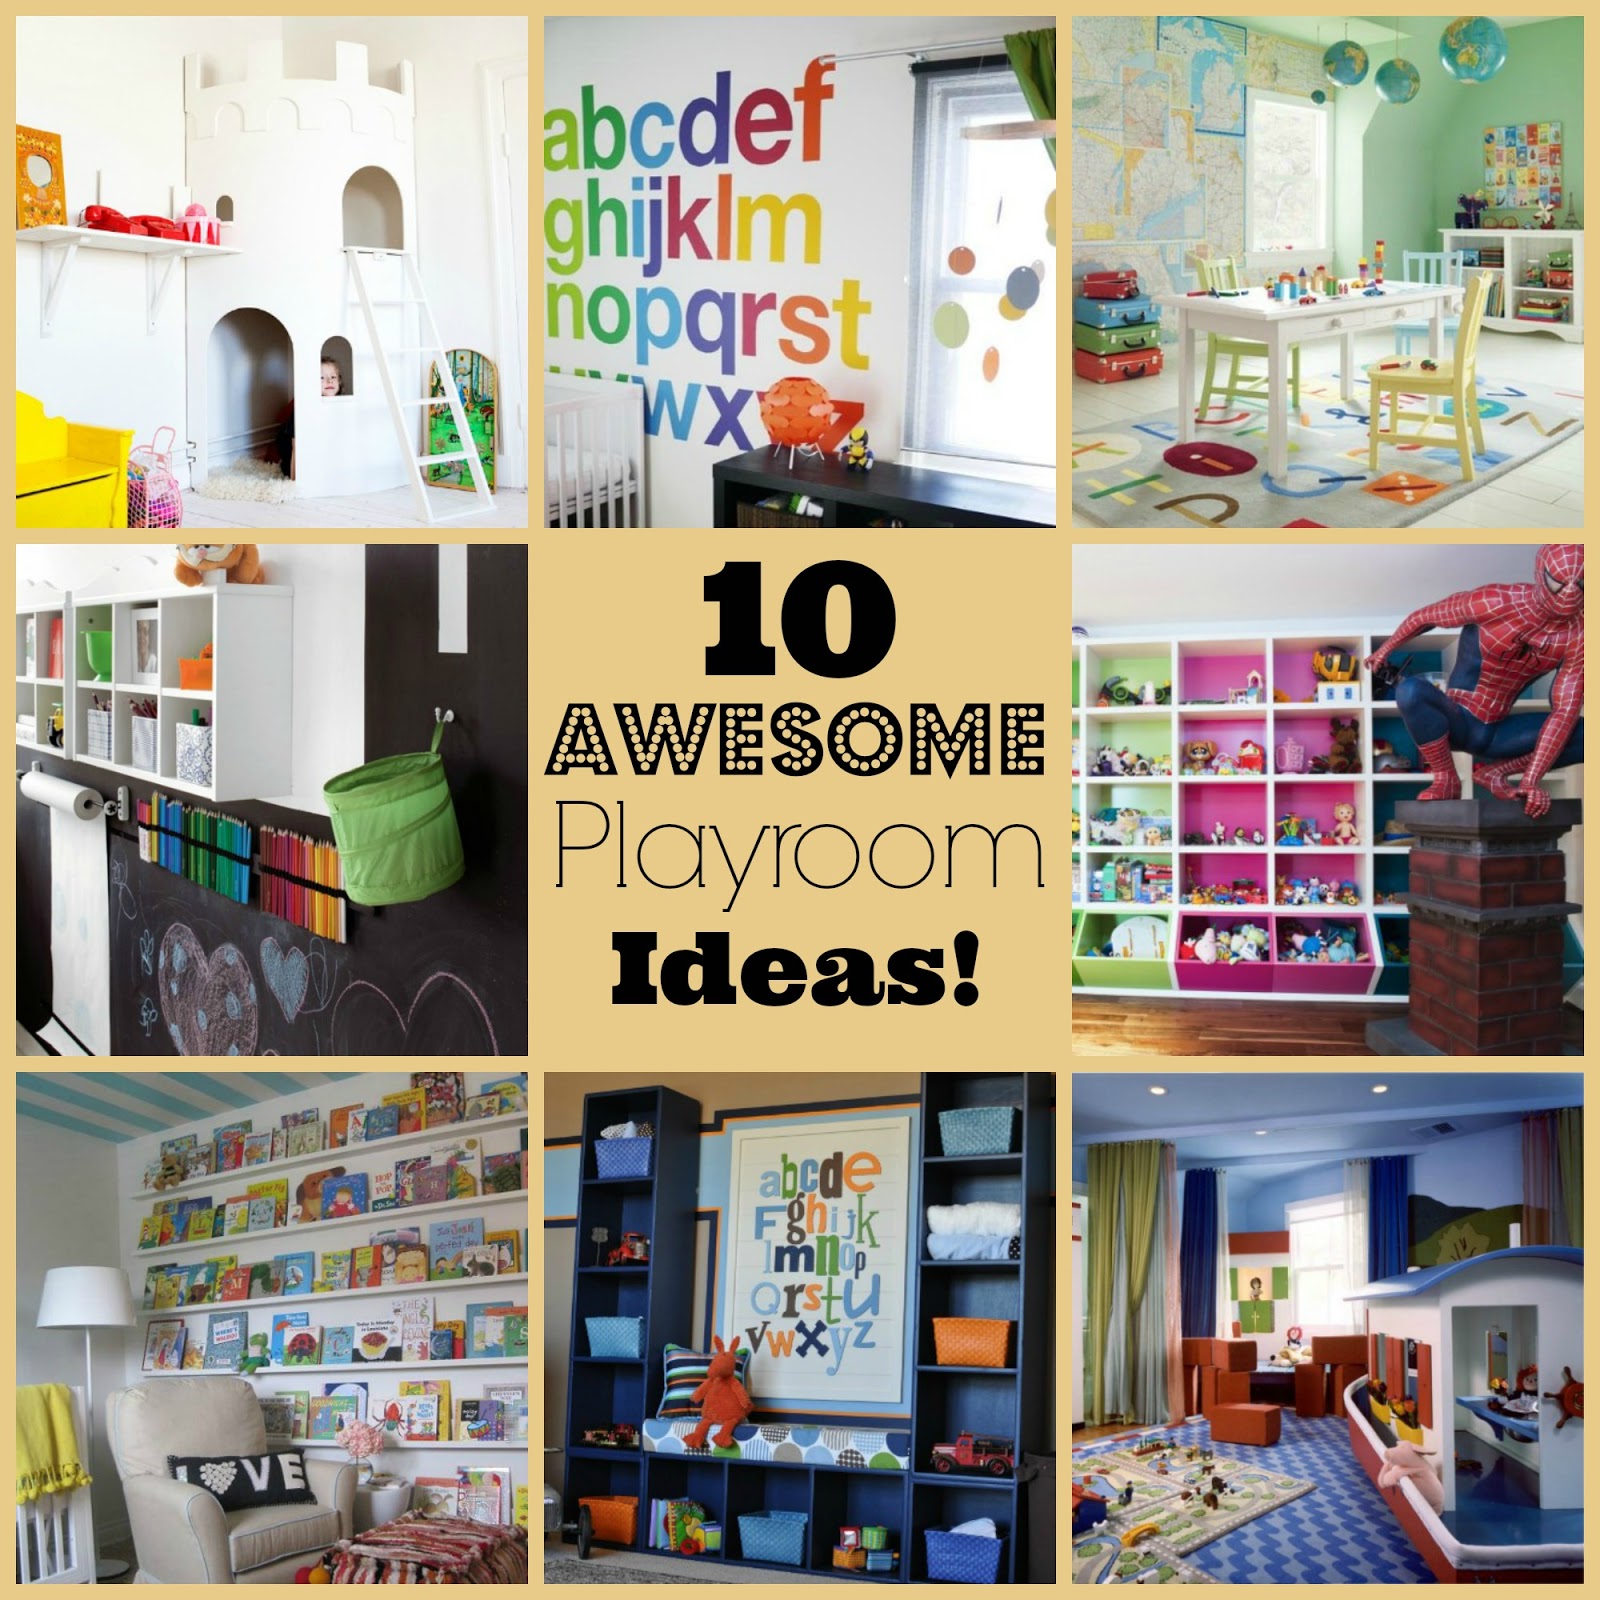 She Turned Her Dreams Into Plans: 10 Awesome Playroom Ideas